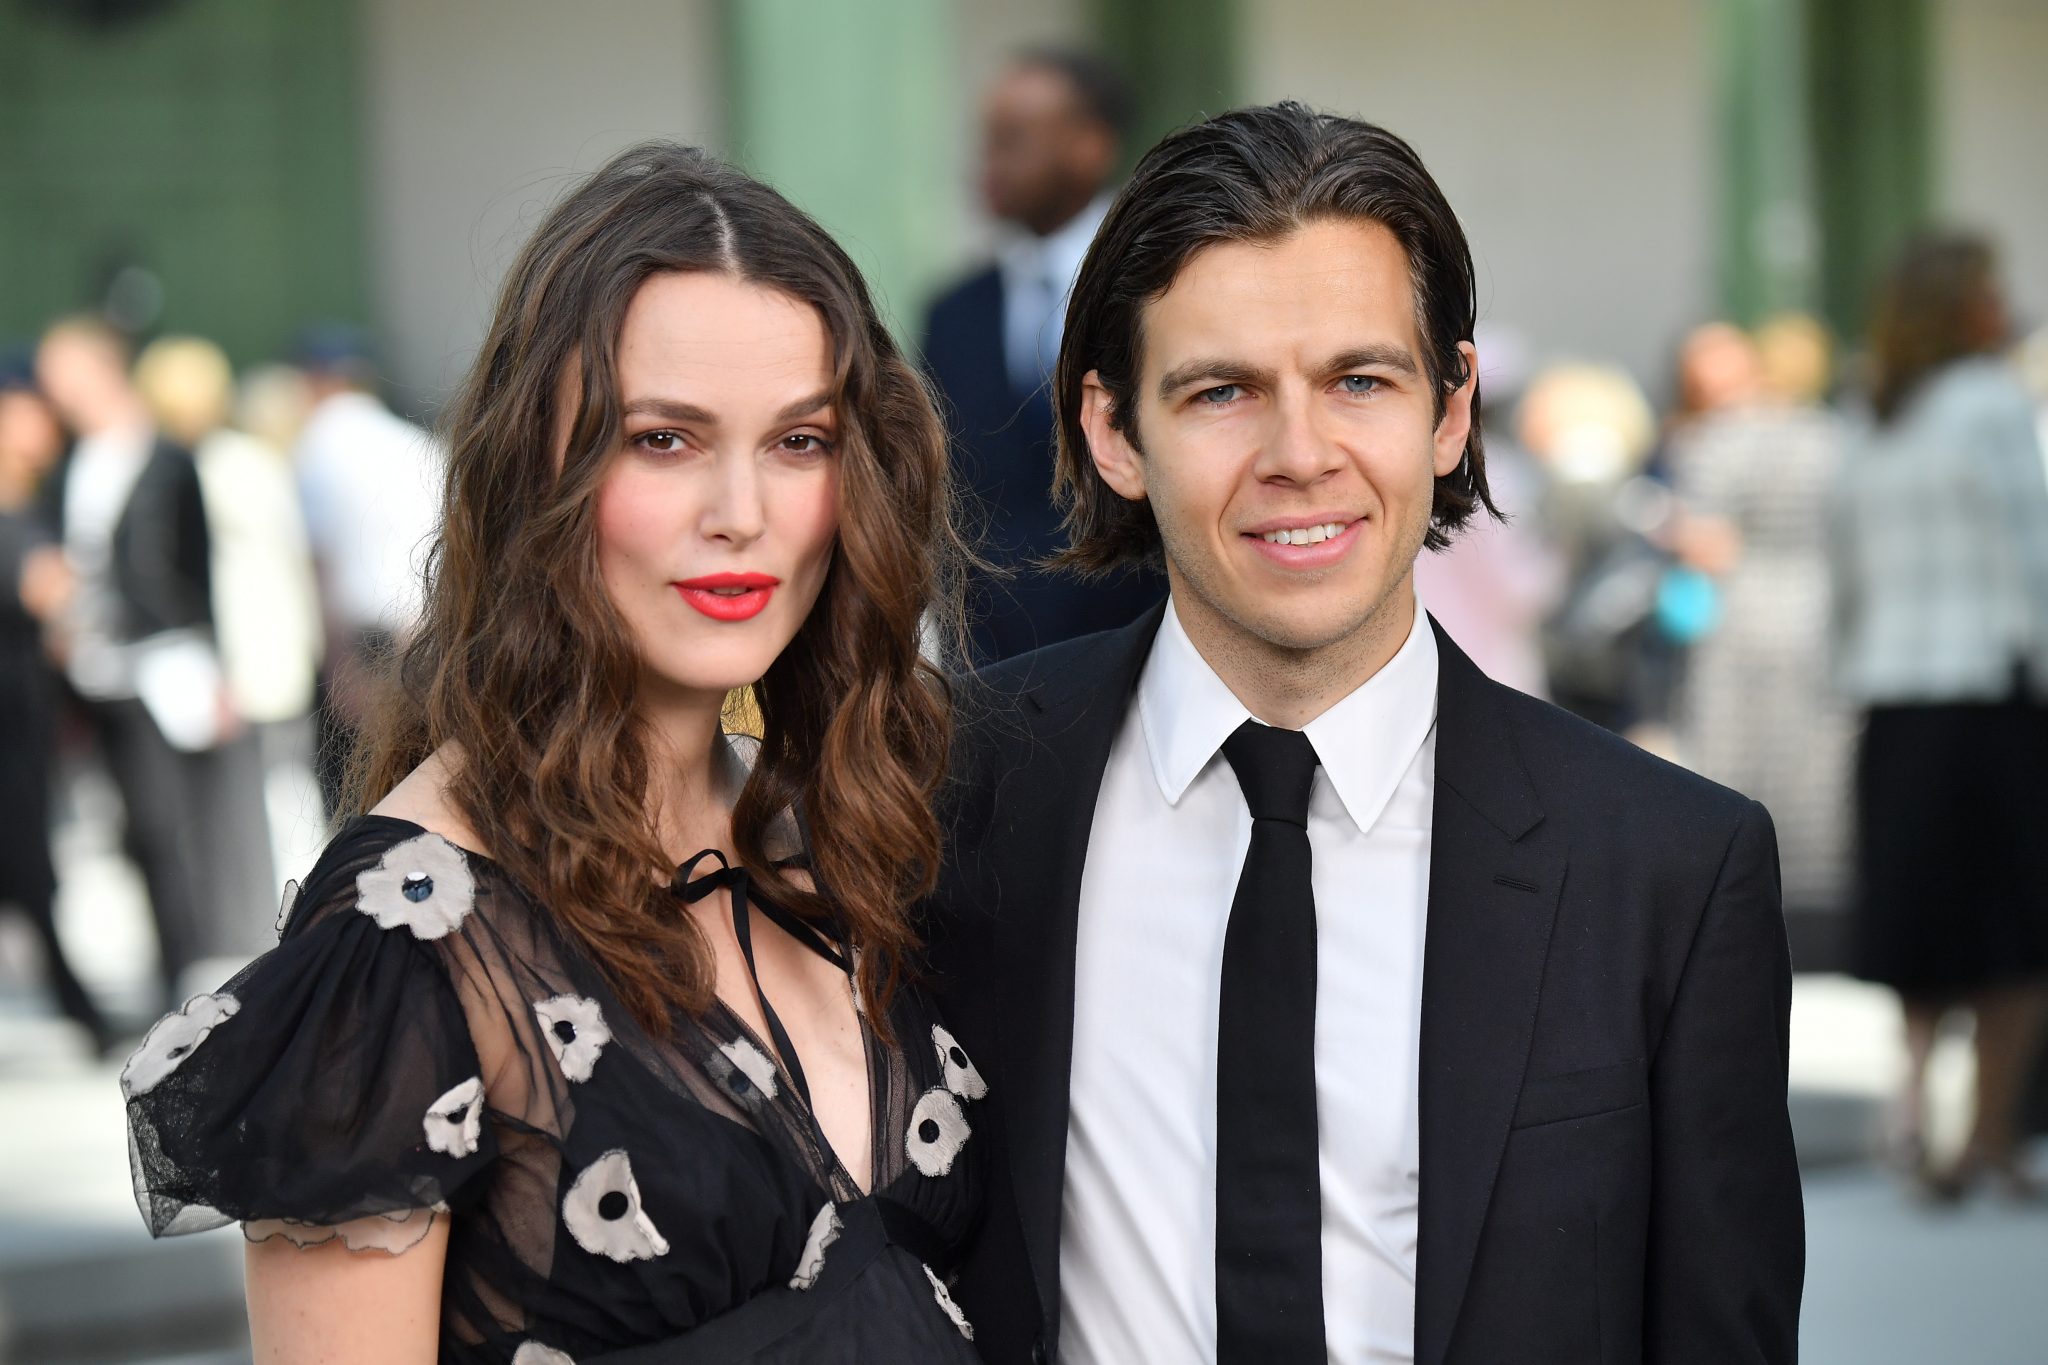 Keira Knightley and James Righton have welcomed their second child